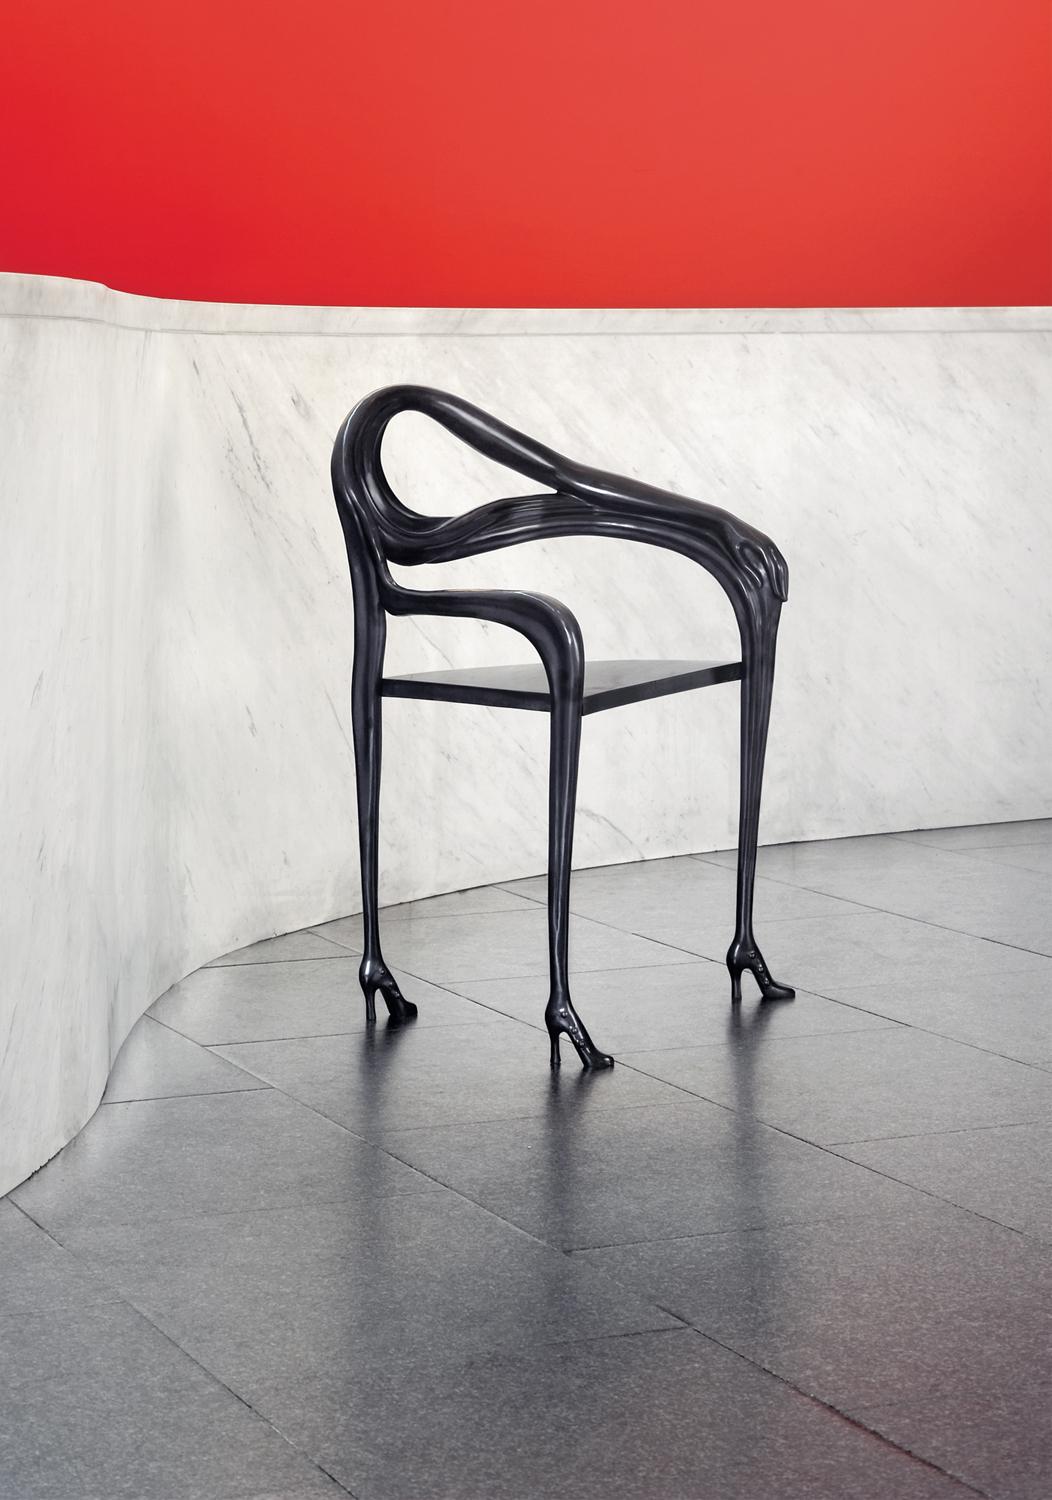 Leda Blacklabel armchair, Limited Edition, Salvador Dalí
Limited to 105 pieces
Design inspired on an artwork by Salvador Dalí
Dimensions: 47 x 60 x 92 H cm
Materials: Structure in cast polished brass.

Design inspired on an artwork by Salvador